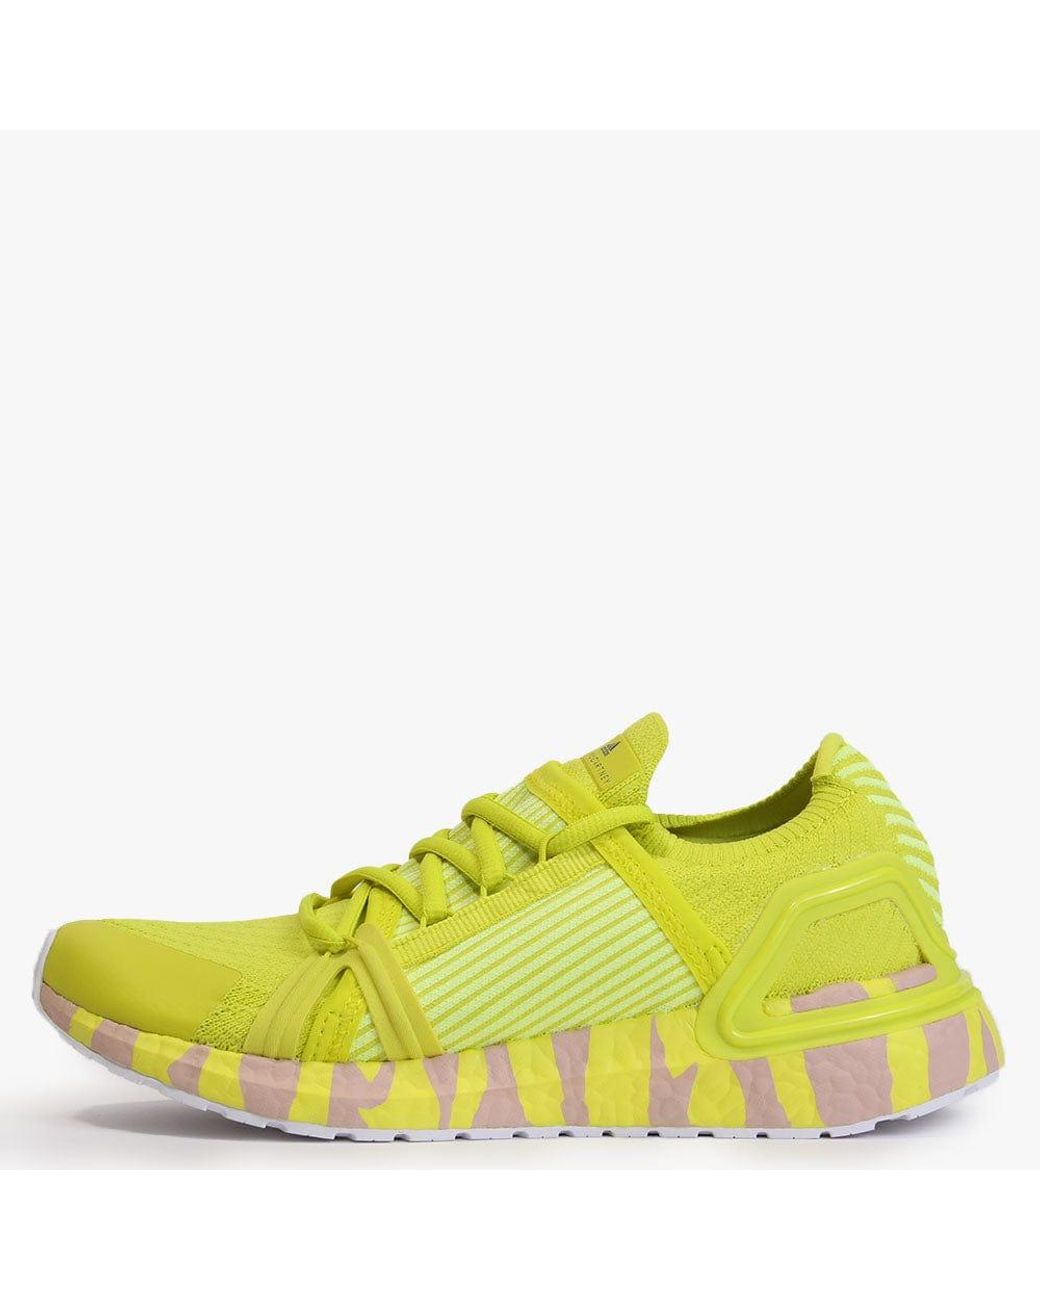 adidas By Stella McCartney Ultraboost 20 Sneaker In Yellow Recycled Fabric  | Lyst